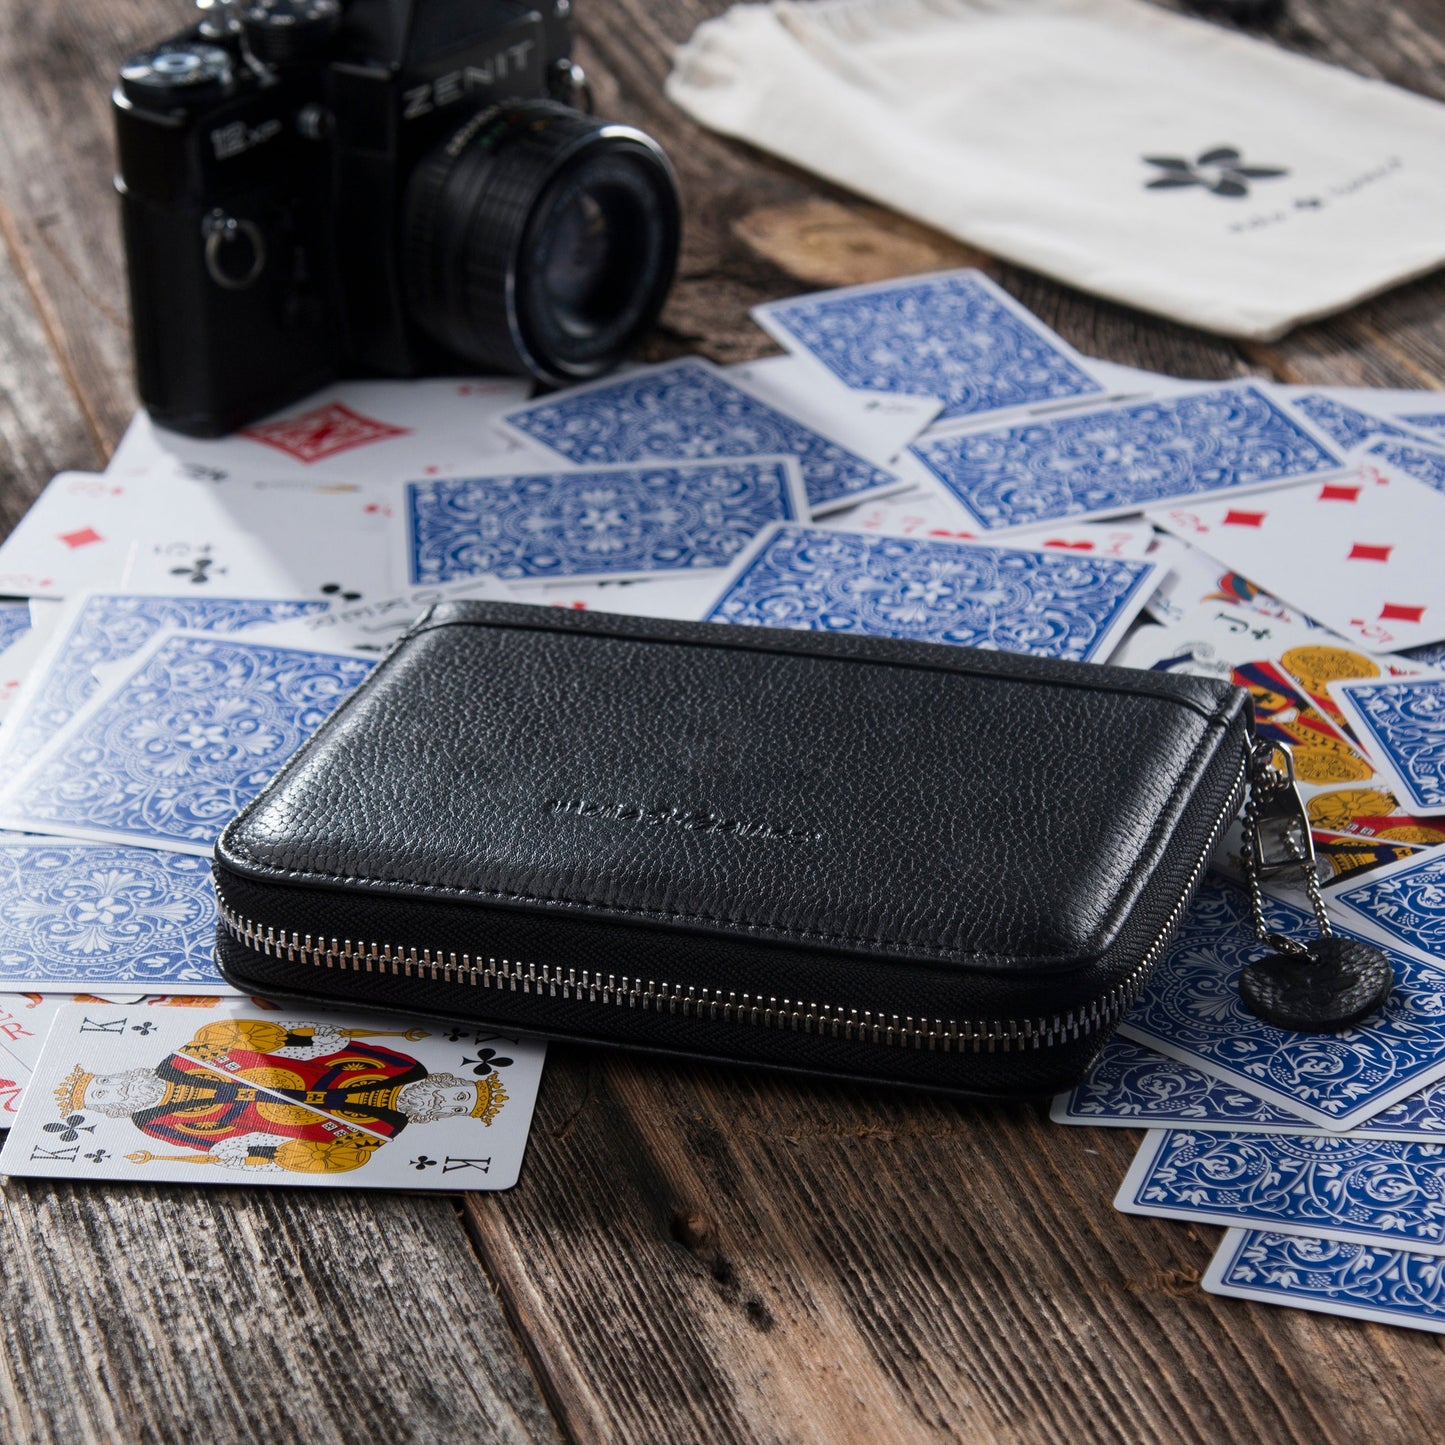 Playing Cards Set Deluxe - Designer Edition - All Black